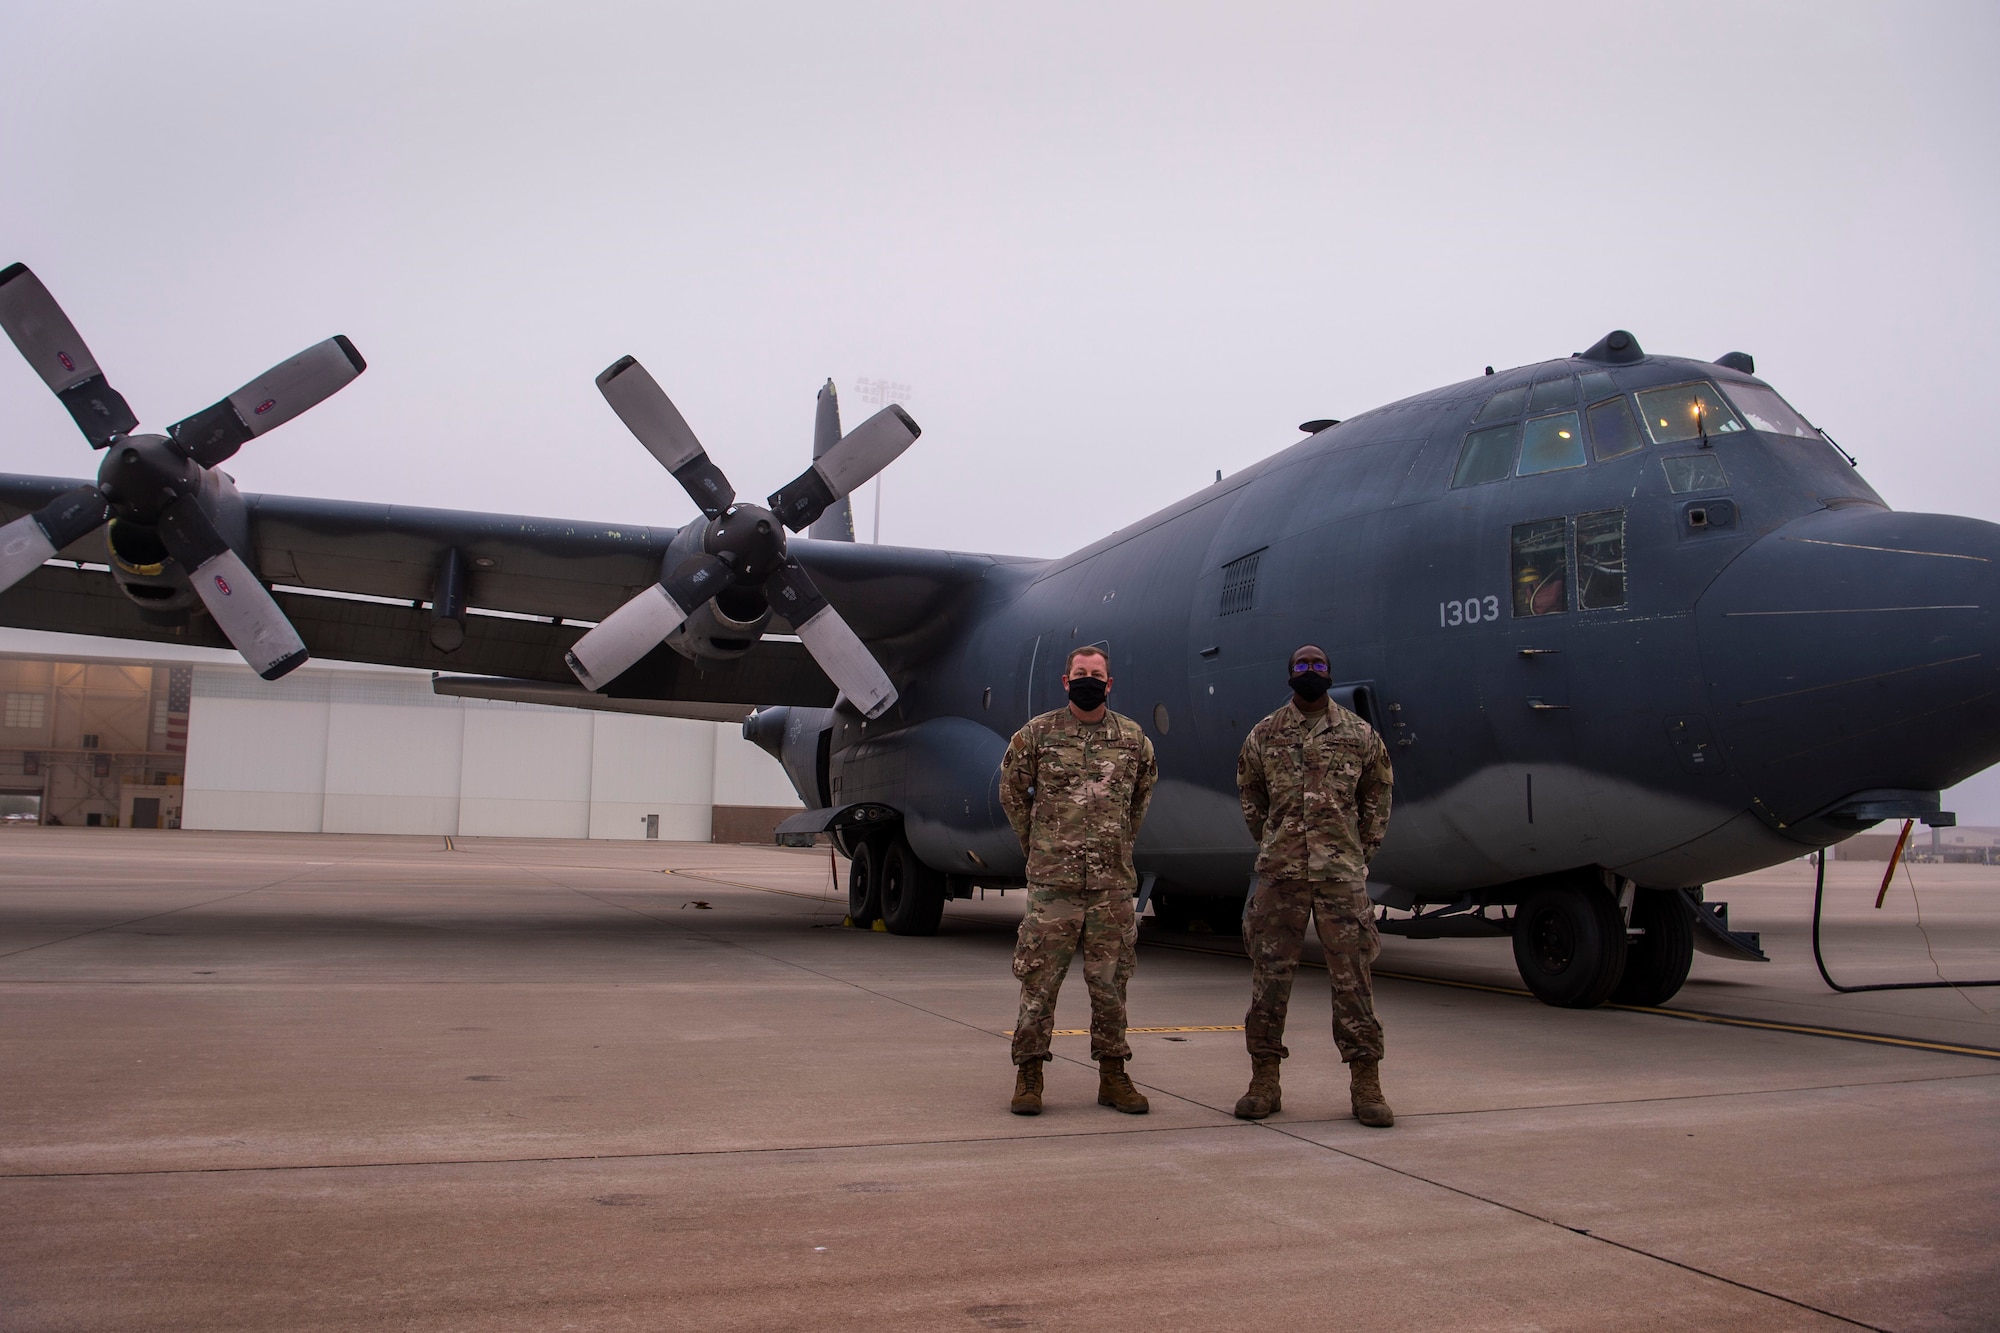 Master Sgt. Kevin Shafer, 16th Aircraft Maintenance Unit crew chief section chief, left, and Staff Sgt. Joshua Ohienmhen, 16 AMU Non-Commissioned Officer in charge, stand in front of an AC-130W Stinger II gunship, Tail No. 1303, prior to the aircraft’s final flight before retirement at Cannon Air Force Base, N.M., Oct. 19, 2020. Shafer was Tail No. 1303’s Dedicated Crew Chief in 2009 while Ohienmhen served as the most recent DCC for the aircraft. (U.S. Air Force photo by Staff Sgt. Luke Kitterman)